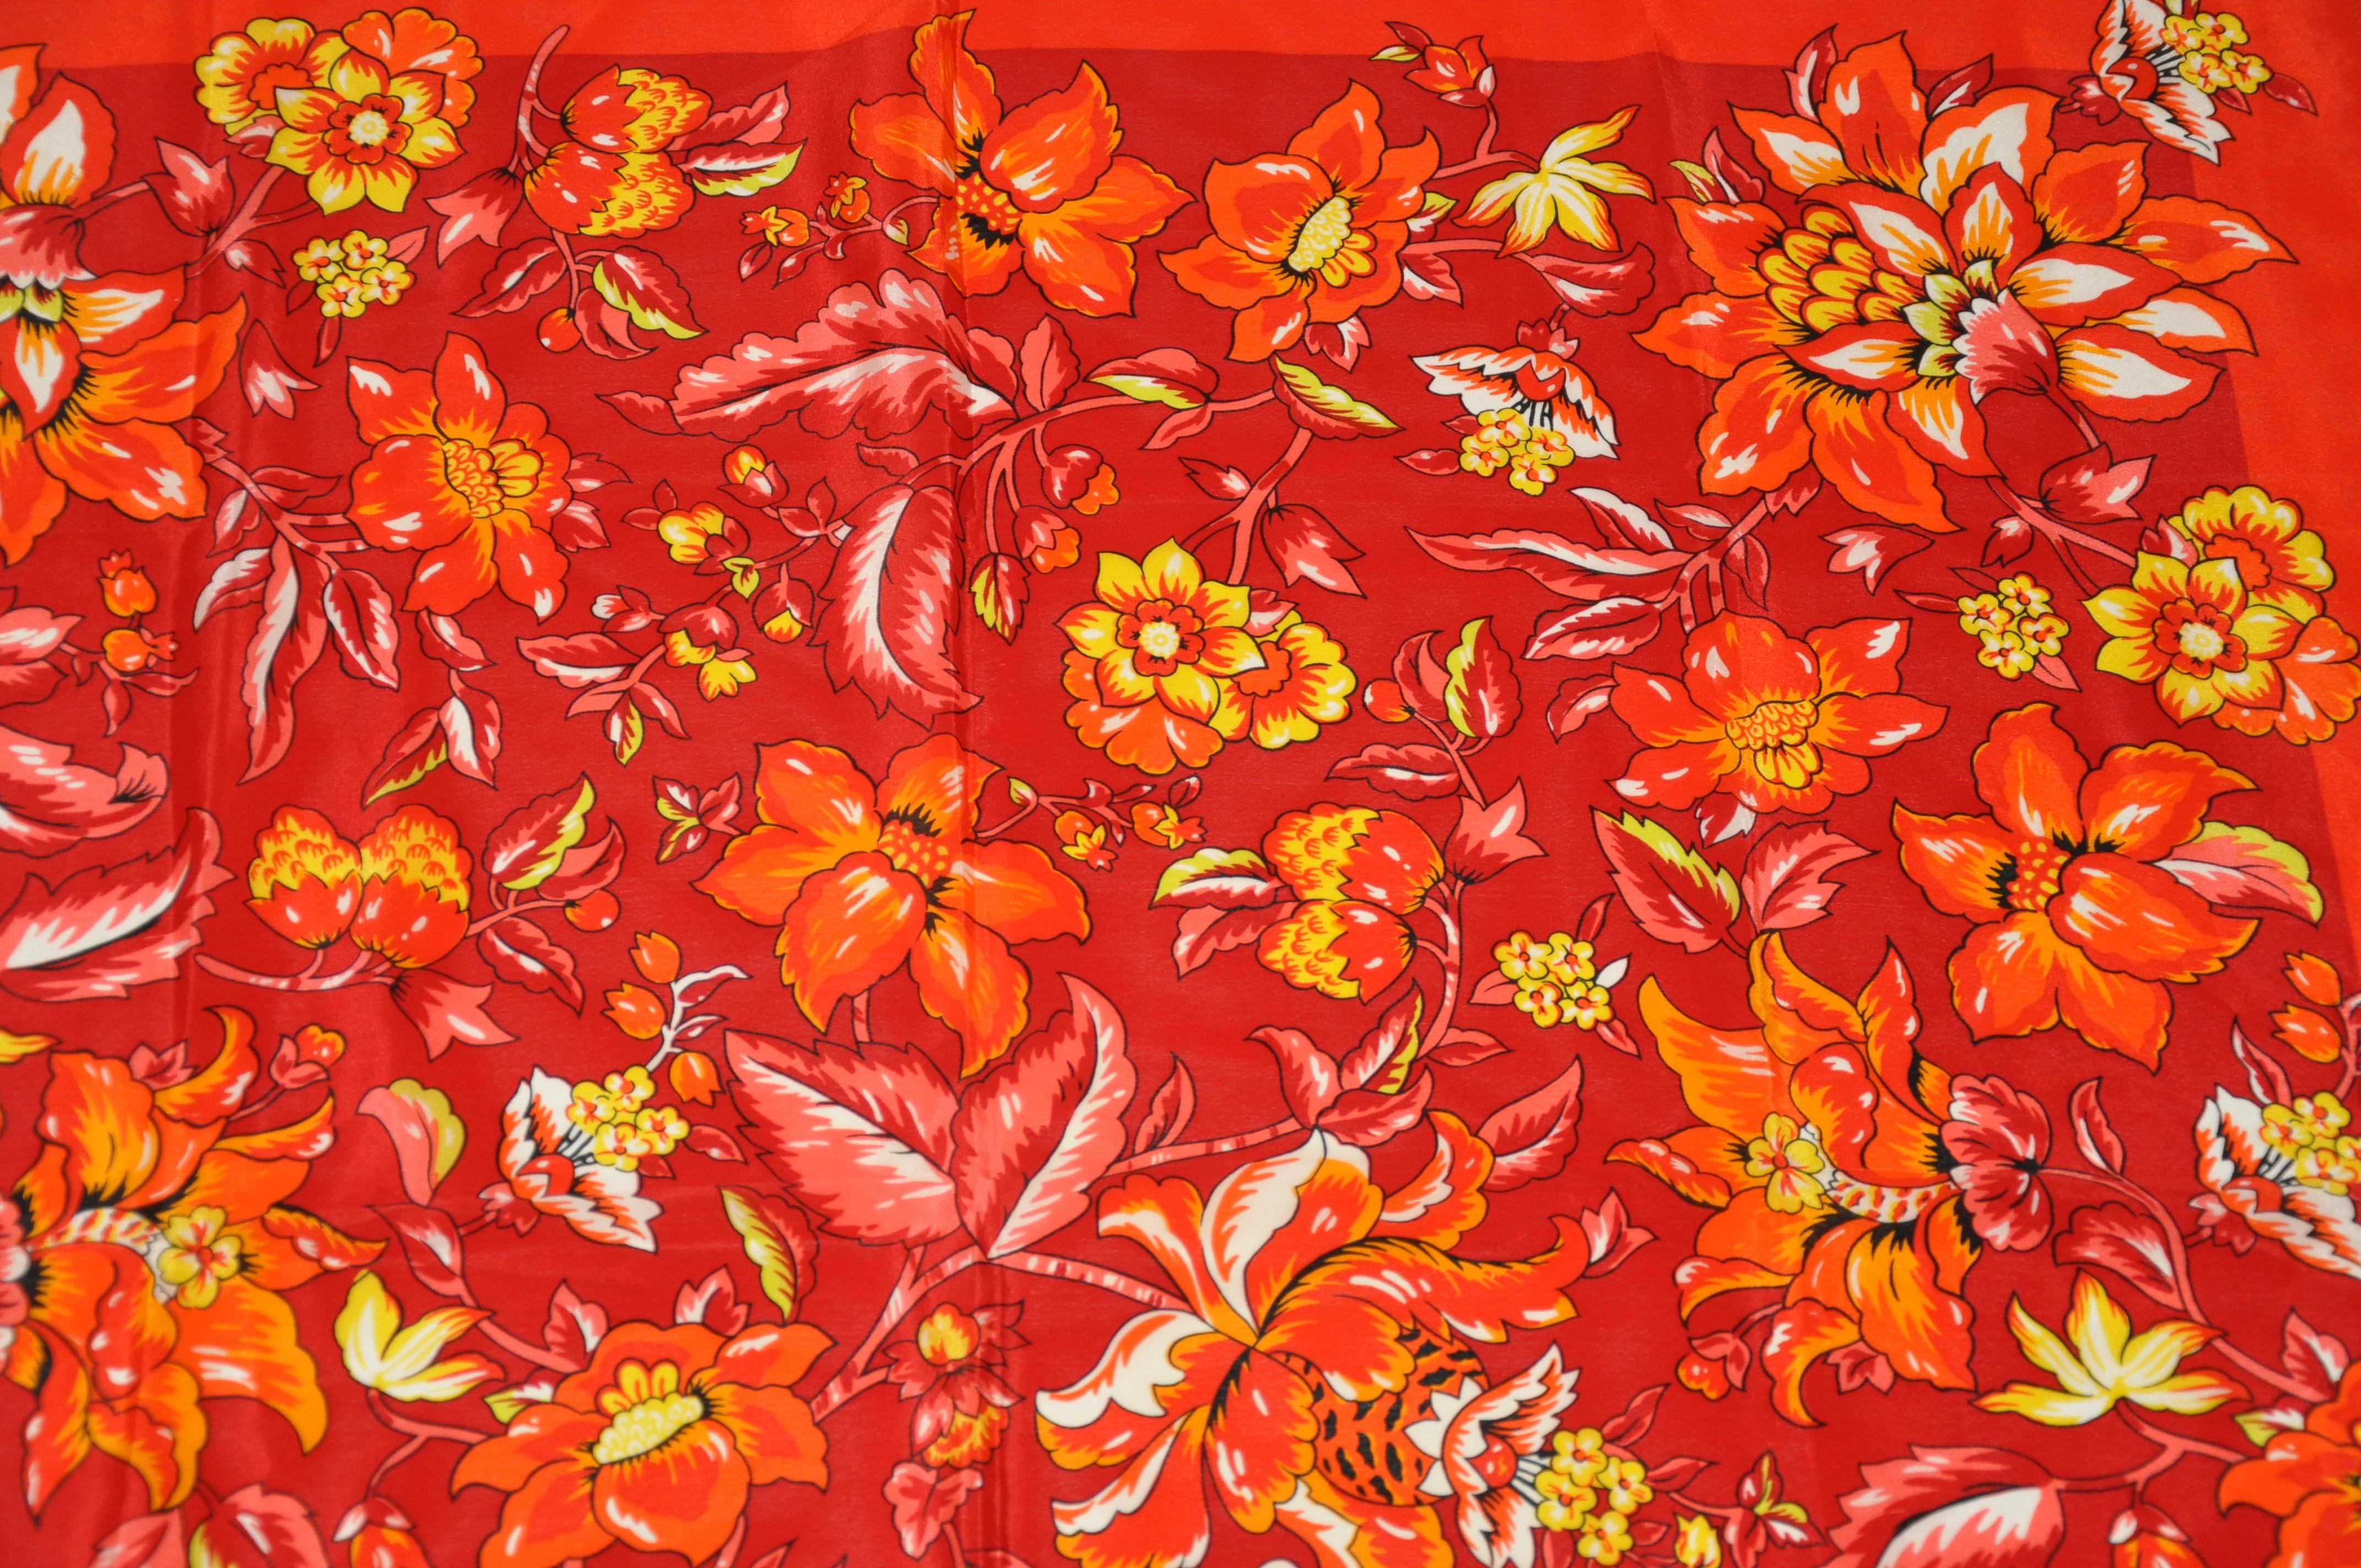 Red Adrienne Vittadini Wonderfully Glorious Floral Silk Scarf For Sale